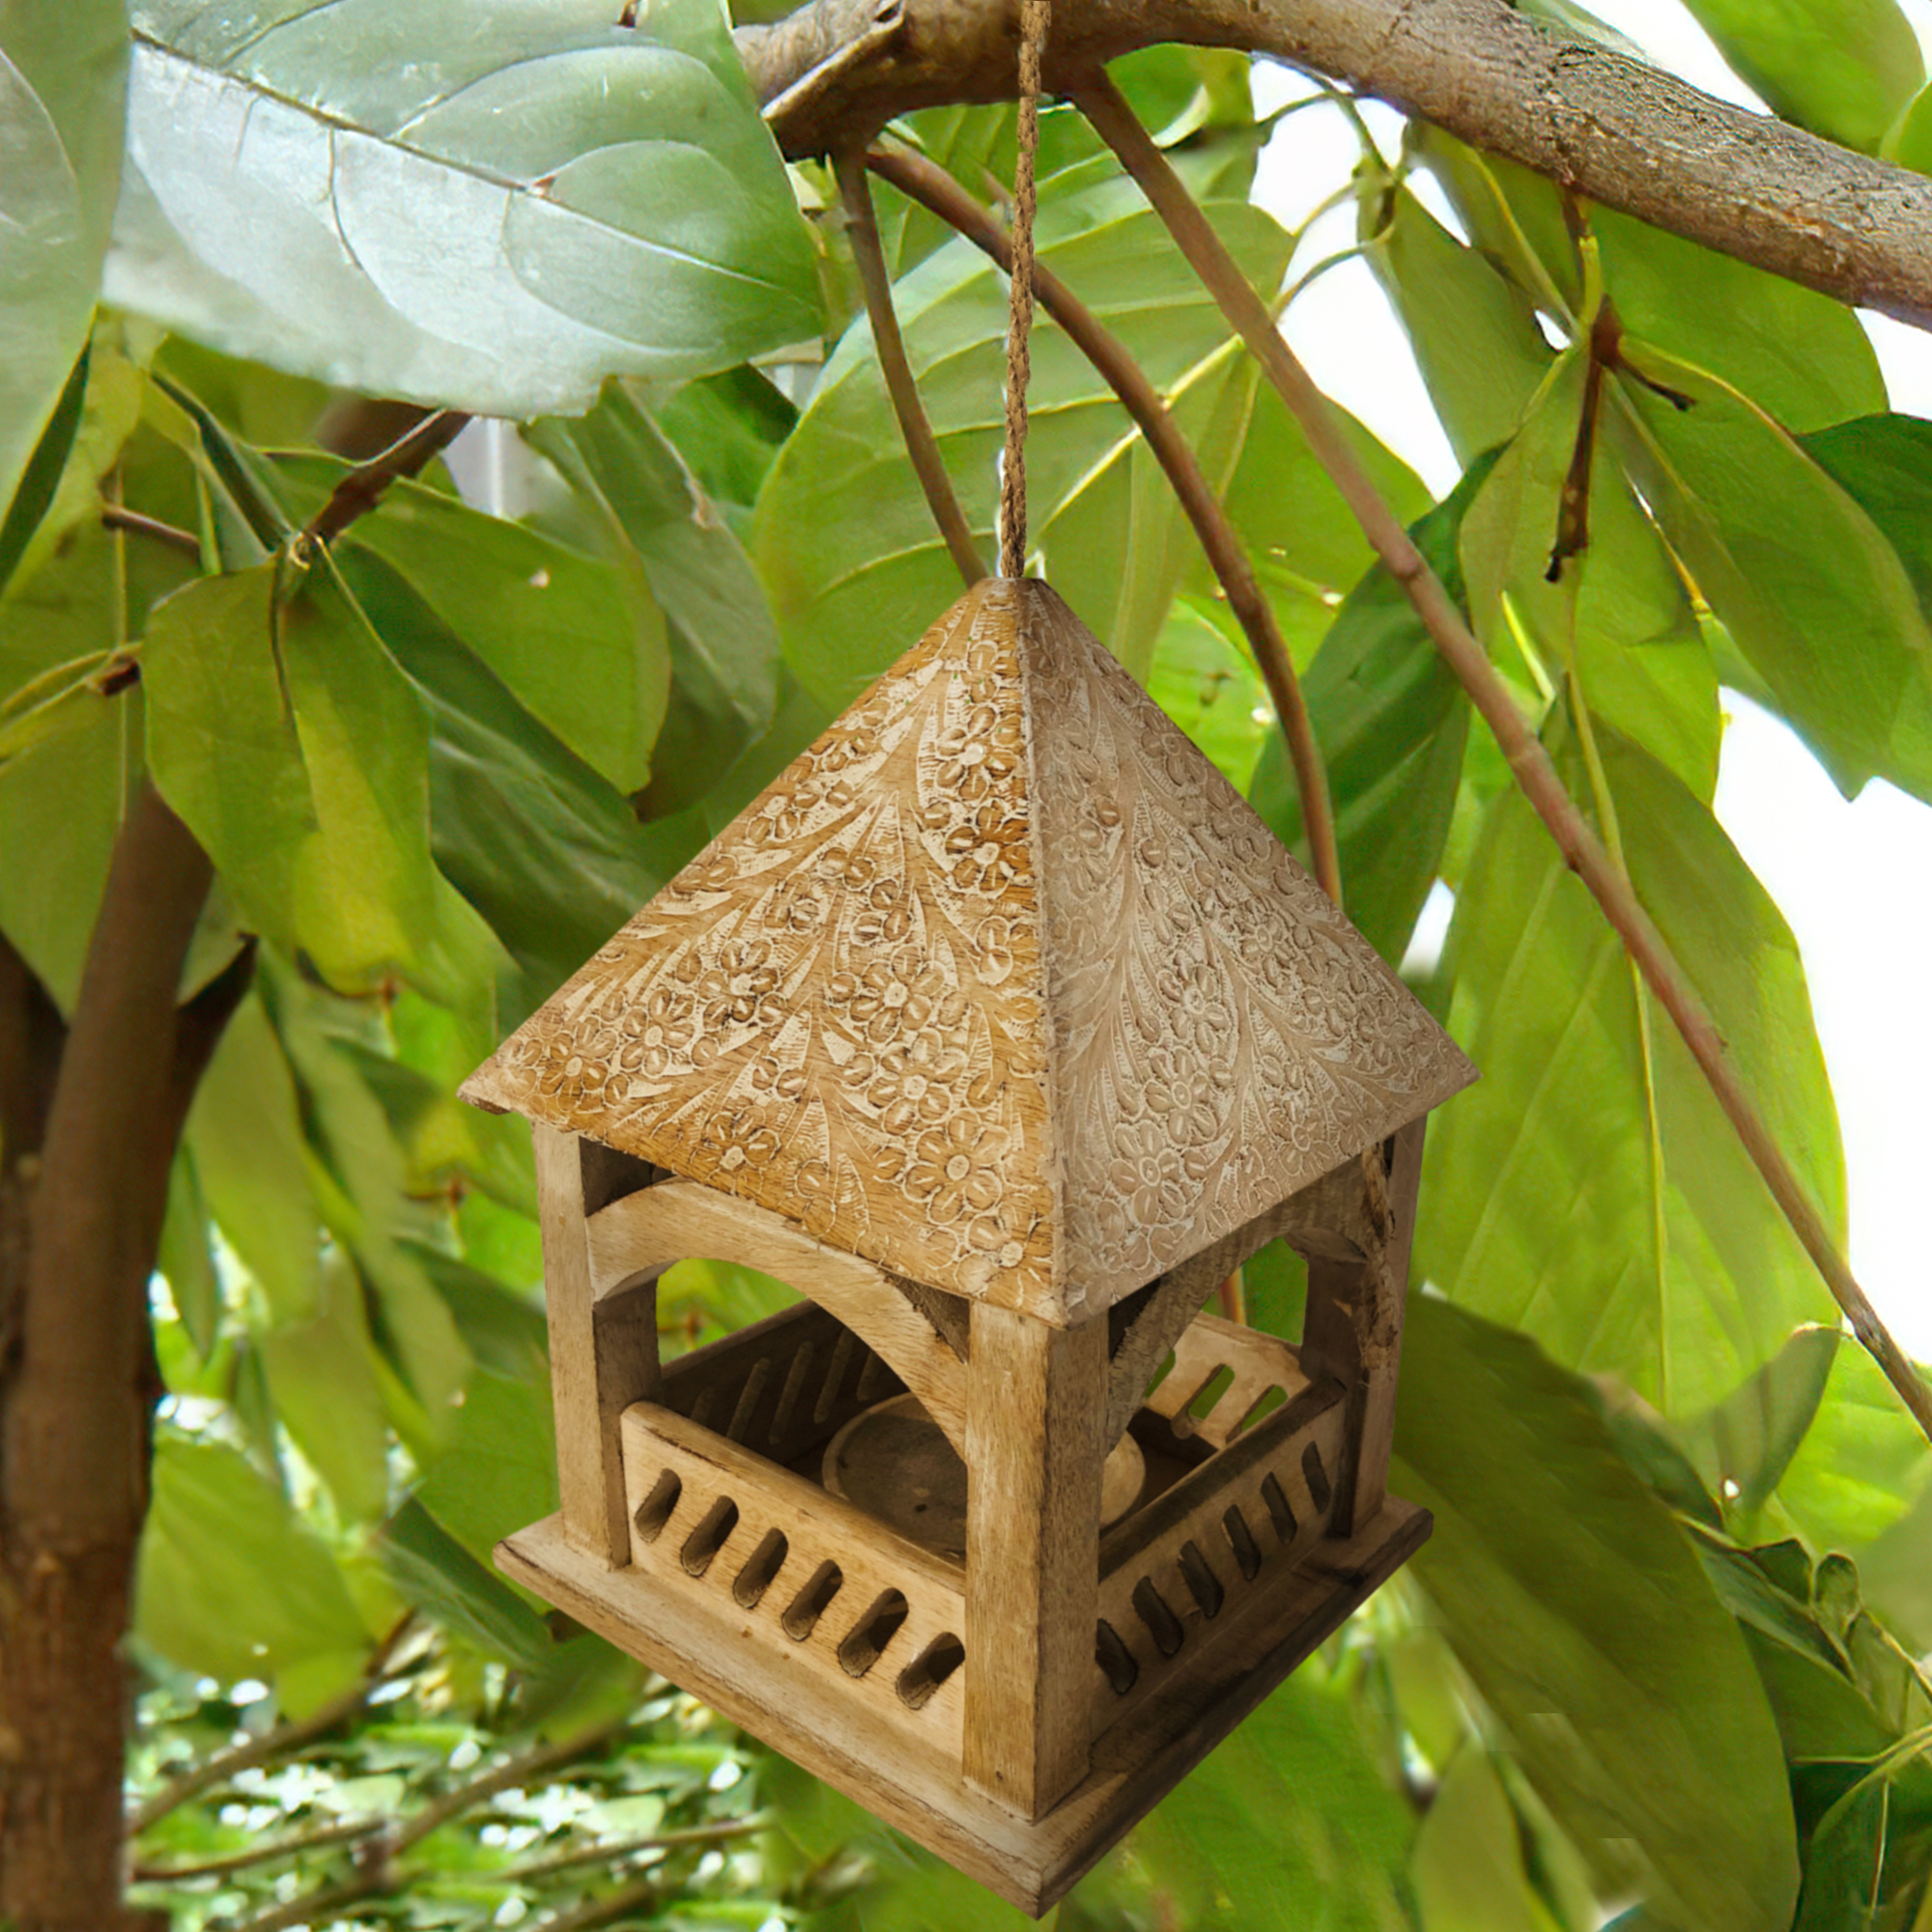 Floral Engraved Decorative Temple Top Mango Wood Hanging Bird House With Feeder, Brown- Saltoro Sherpi